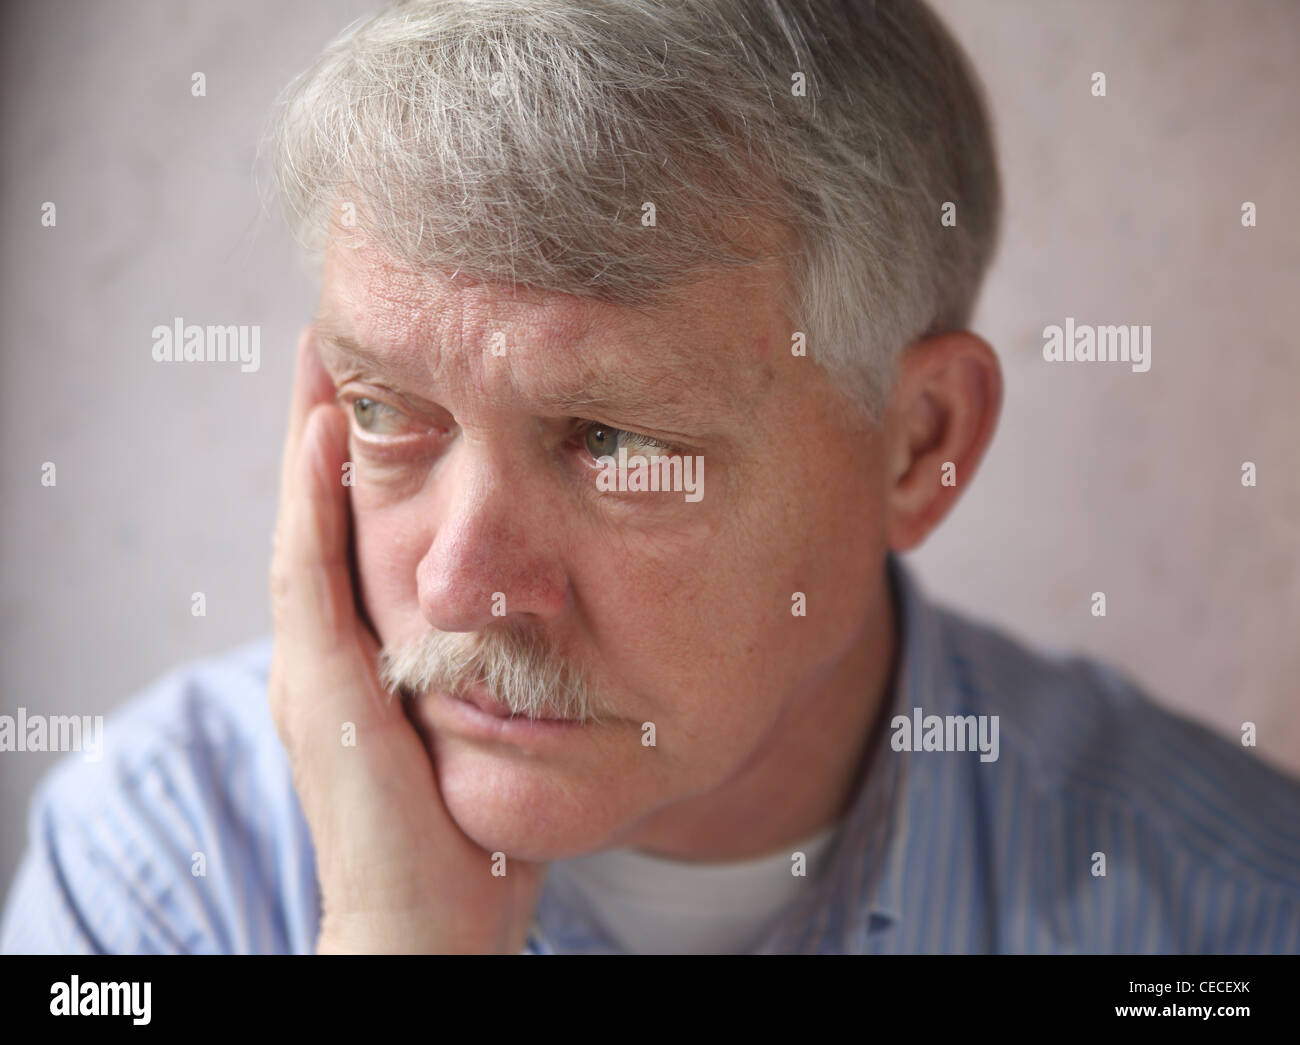 senior man with an angry, troubled expression Stock Photo